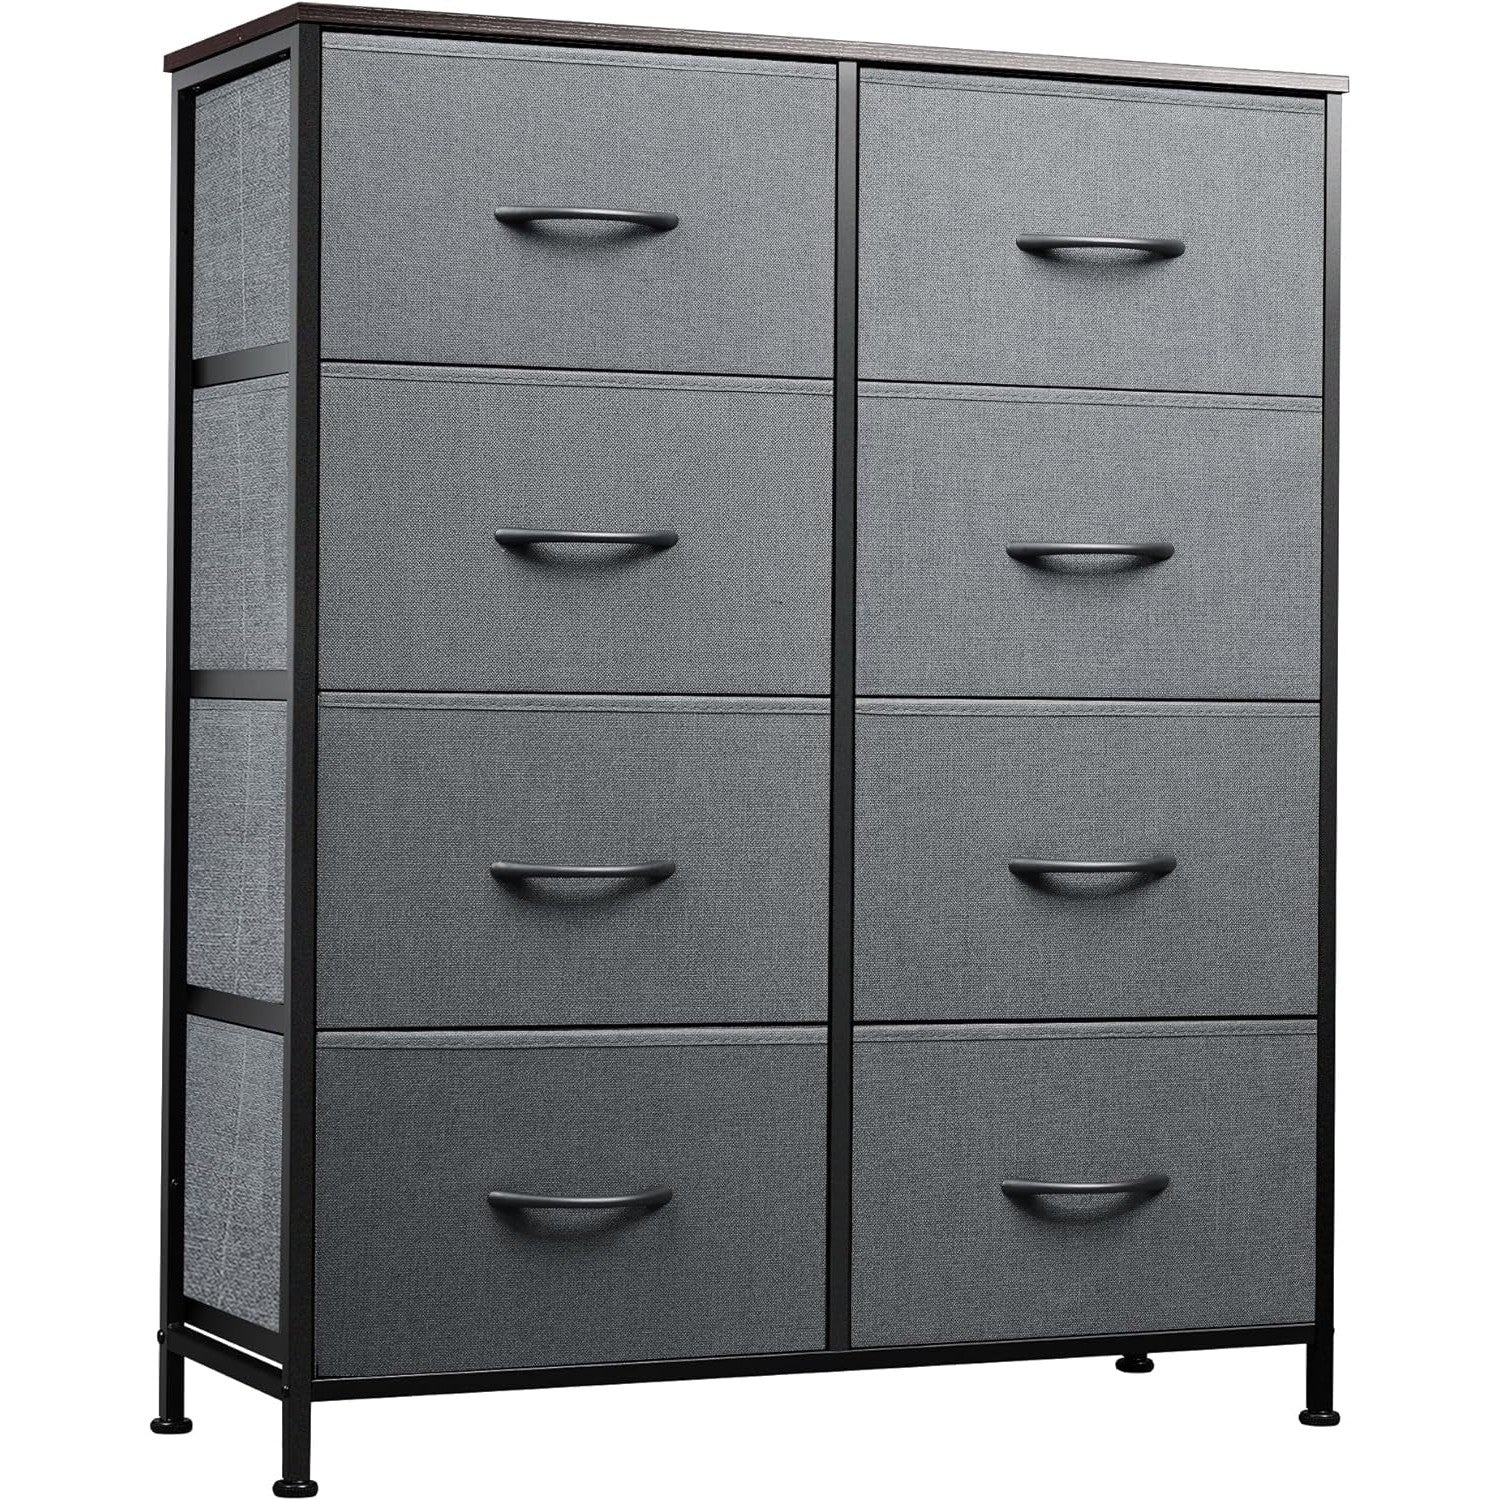 WLIVE Fabric Dresser with 8 Drawers